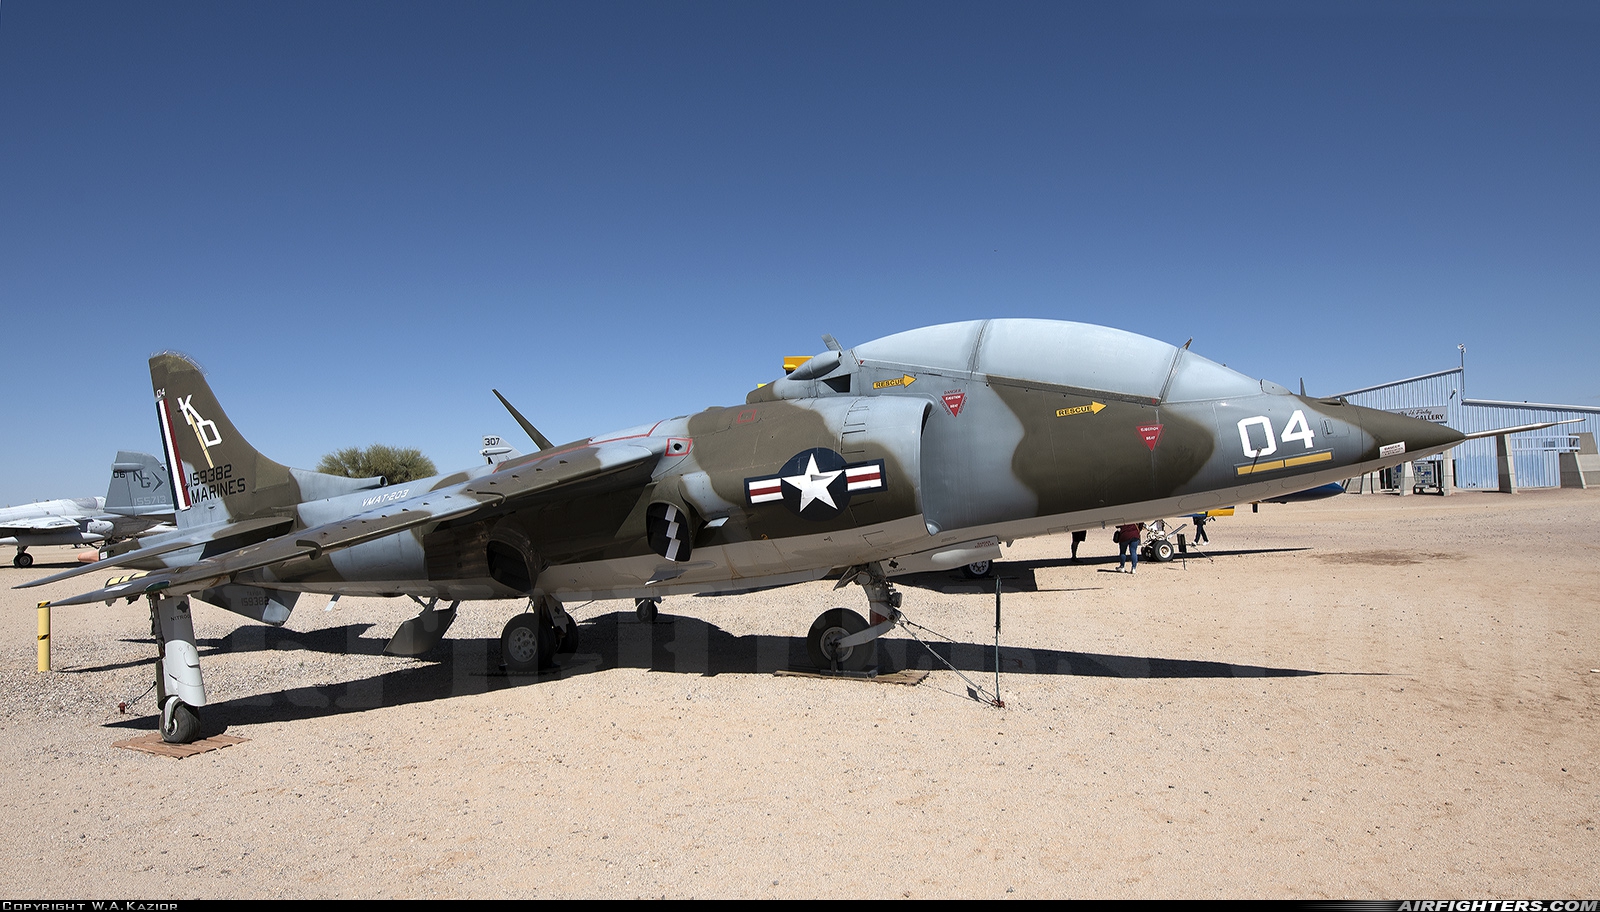 USA - Marines Hawker Siddeley TAV-8A Harrier 159382 at Tucson - Pima Air and Space Museum, USA